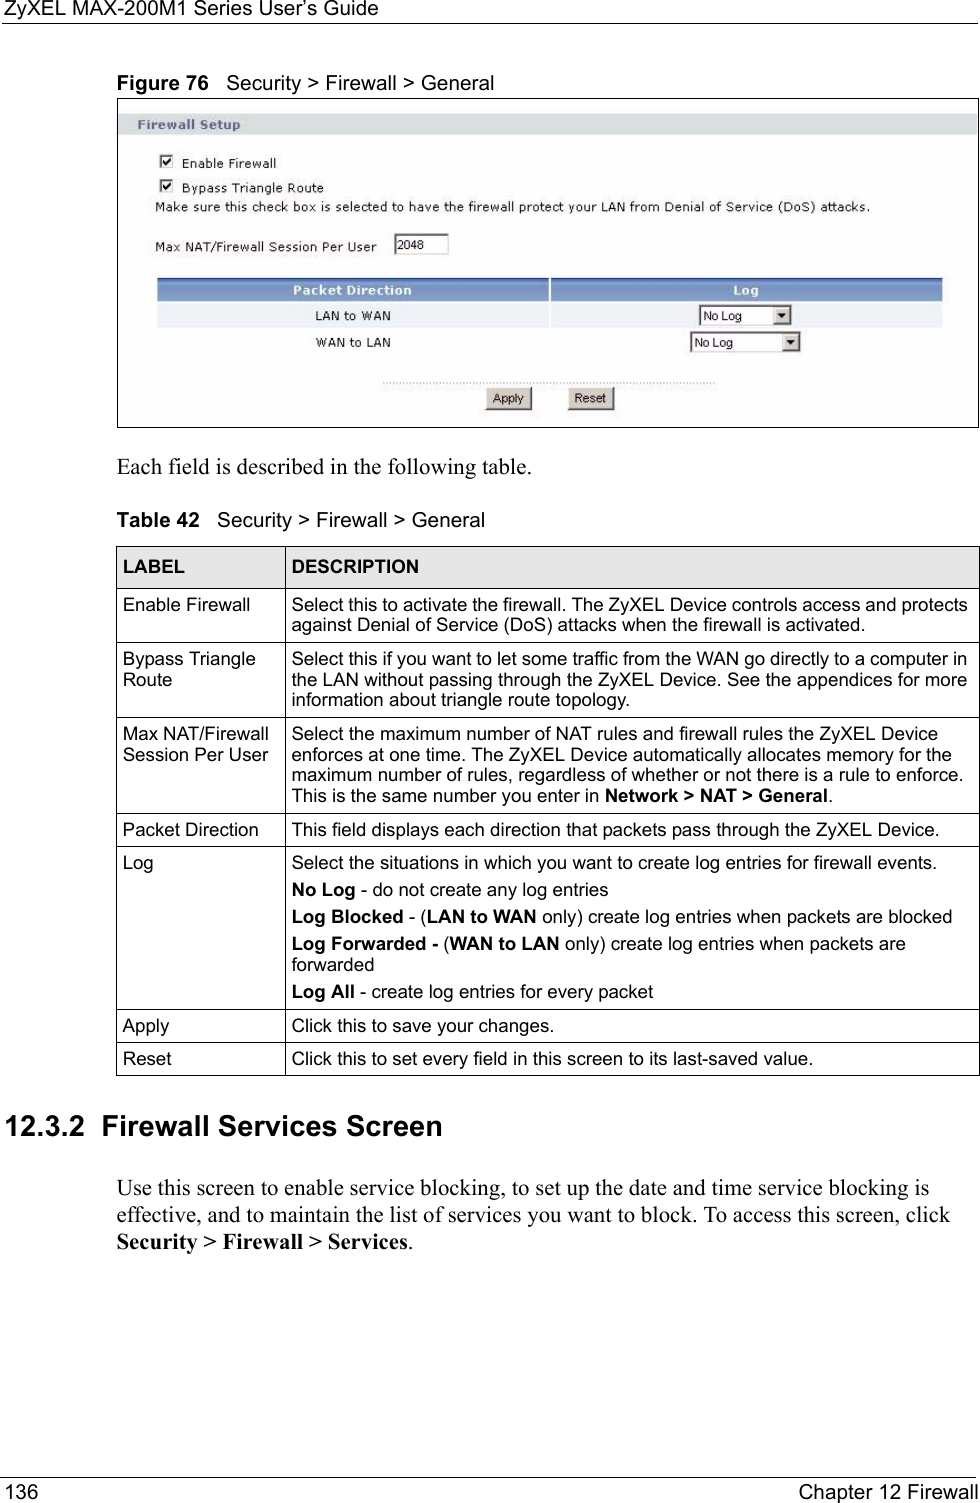 ZyXEL MAX-200M1 Series User’s Guide136 Chapter 12 FirewallFigure 76   Security &gt; Firewall &gt; GeneralEach field is described in the following table.12.3.2  Firewall Services ScreenUse this screen to enable service blocking, to set up the date and time service blocking is effective, and to maintain the list of services you want to block. To access this screen, click Security &gt; Firewall &gt; Services.Table 42   Security &gt; Firewall &gt; GeneralLABEL DESCRIPTIONEnable Firewall Select this to activate the firewall. The ZyXEL Device controls access and protects against Denial of Service (DoS) attacks when the firewall is activated.Bypass Triangle RouteSelect this if you want to let some traffic from the WAN go directly to a computer in the LAN without passing through the ZyXEL Device. See the appendices for more information about triangle route topology.Max NAT/Firewall Session Per UserSelect the maximum number of NAT rules and firewall rules the ZyXEL Device enforces at one time. The ZyXEL Device automatically allocates memory for the maximum number of rules, regardless of whether or not there is a rule to enforce. This is the same number you enter in Network &gt; NAT &gt; General.Packet Direction This field displays each direction that packets pass through the ZyXEL Device.Log Select the situations in which you want to create log entries for firewall events.No Log - do not create any log entriesLog Blocked - (LAN to WAN only) create log entries when packets are blockedLog Forwarded - (WAN to LAN only) create log entries when packets are forwardedLog All - create log entries for every packetApply Click this to save your changes.Reset Click this to set every field in this screen to its last-saved value.